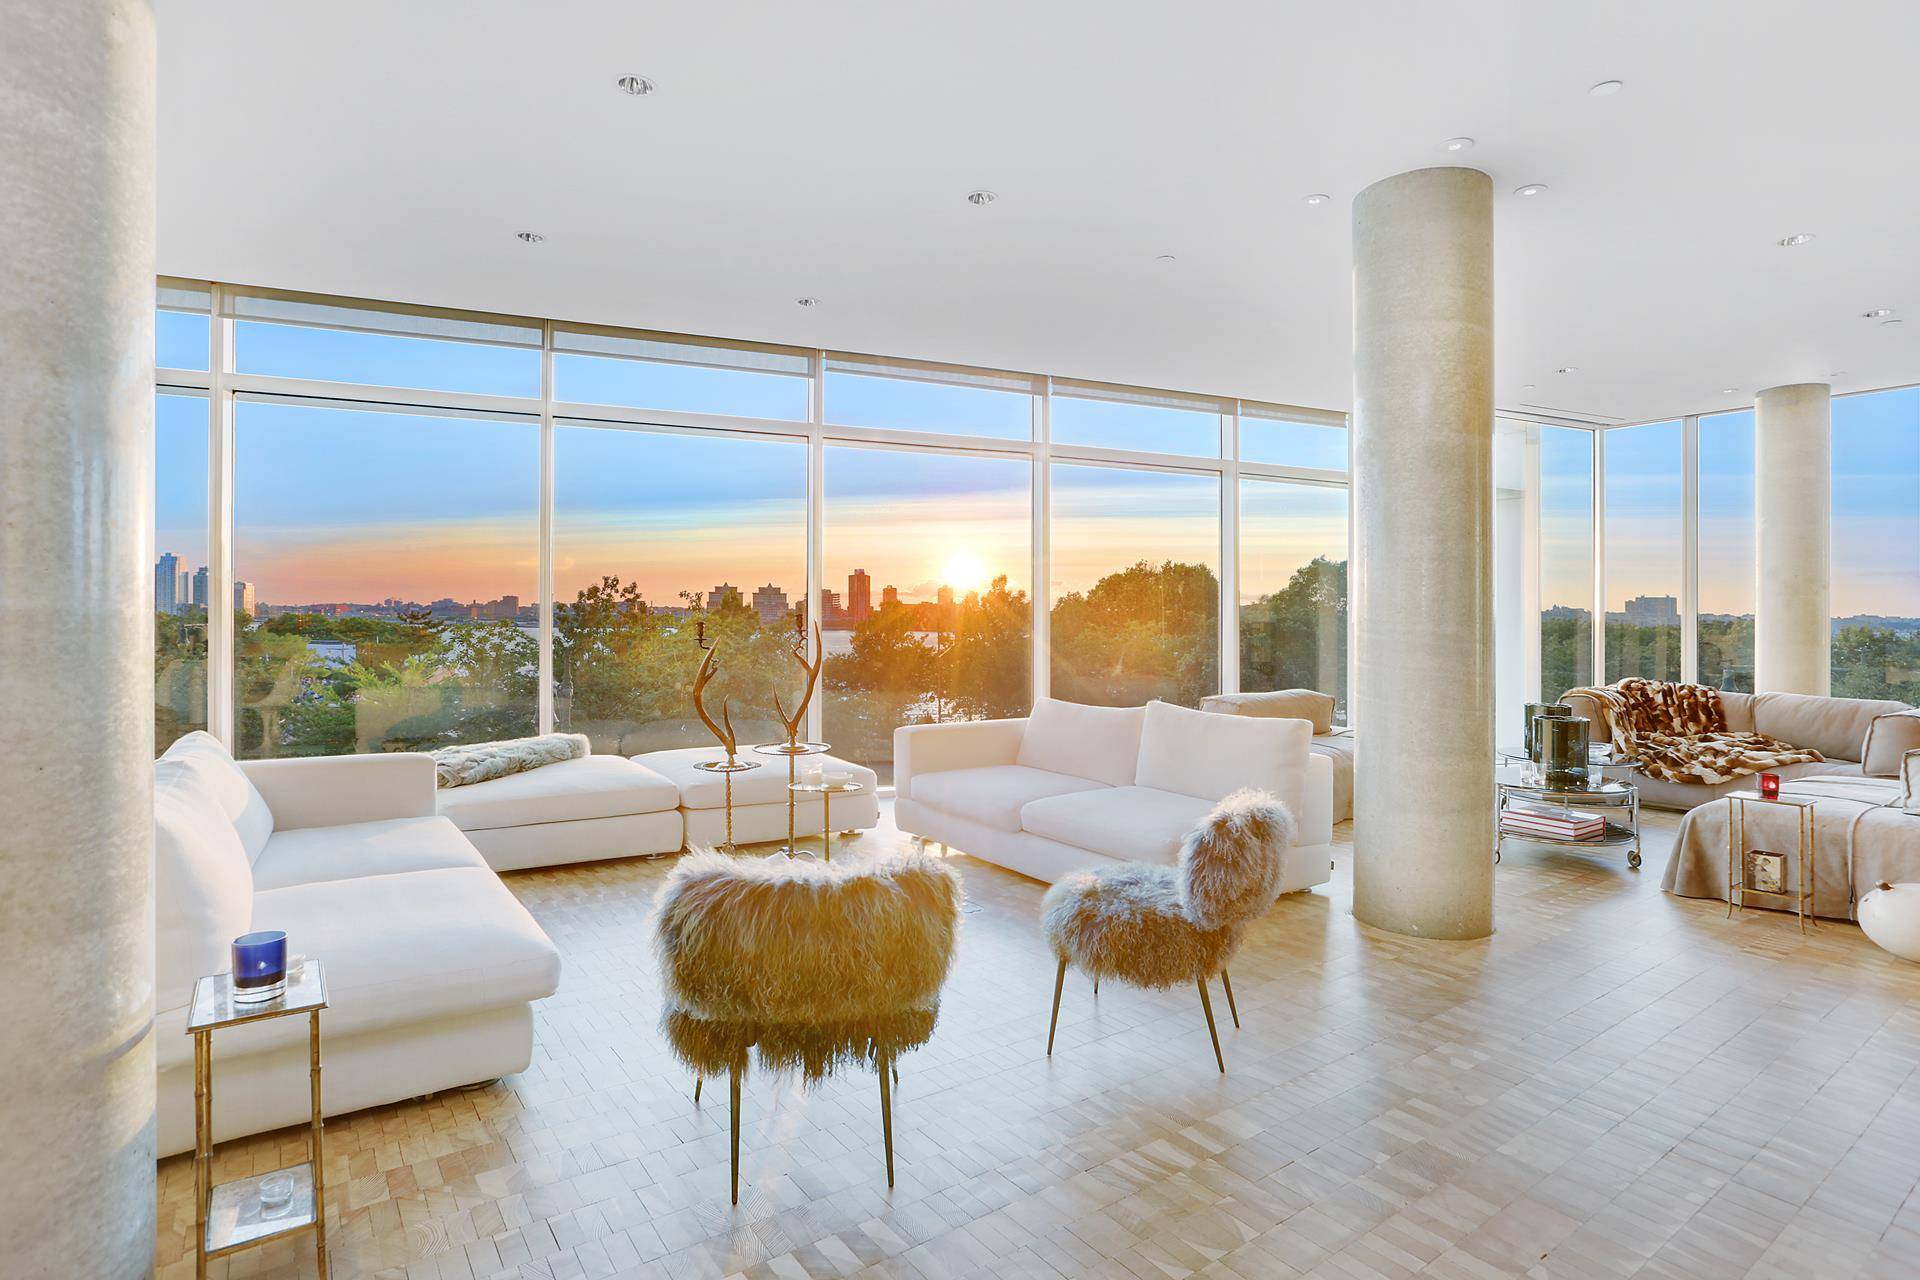 Live your dream in this ultimate Modern lifestyle home designed by Pritzker Prize winning architect Richard Meier.